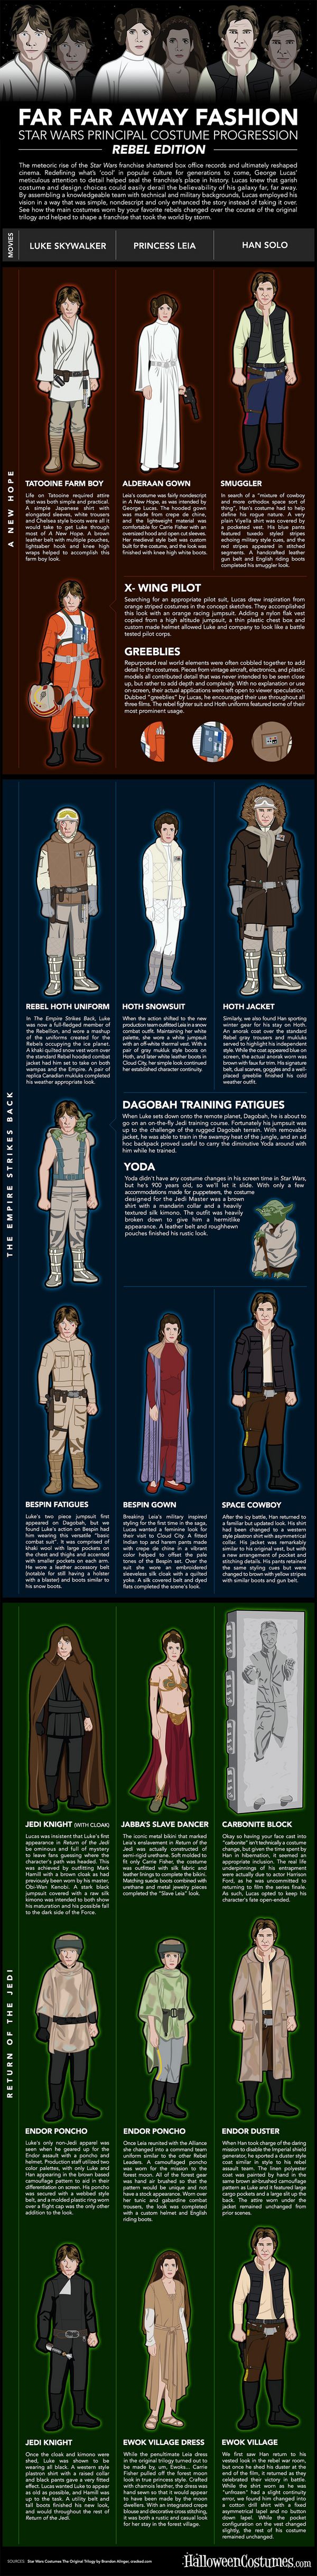 Star Wars Costumes Infographic